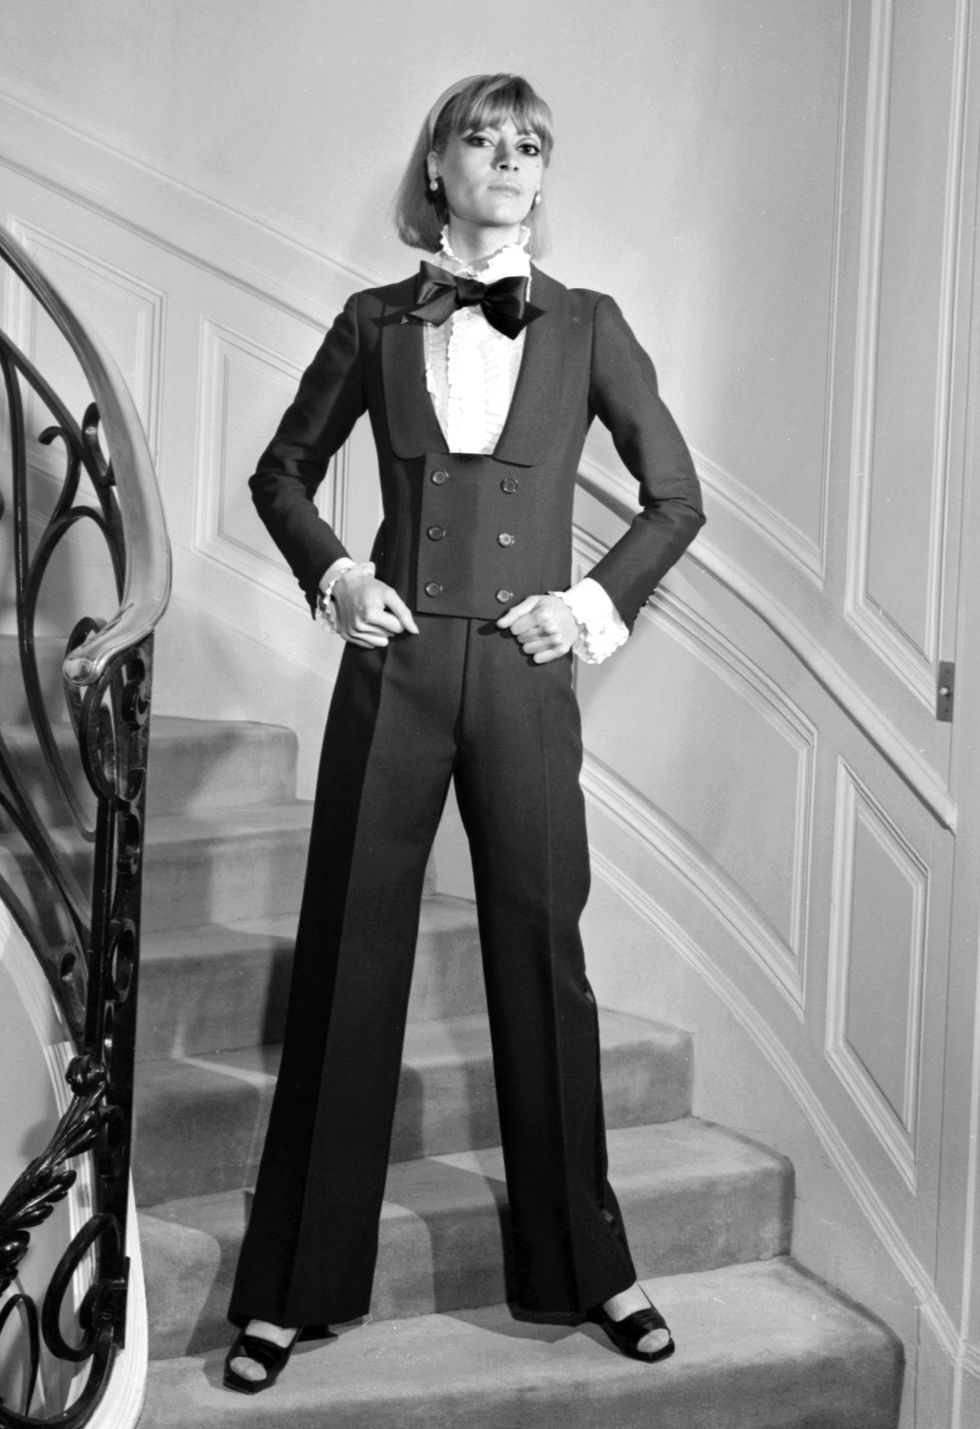 Suit, Formal wear, Clothing, Tuxedo, Standing, Black-and-white, Pantsuit, Outerwear, Photography, Photo shoot, 